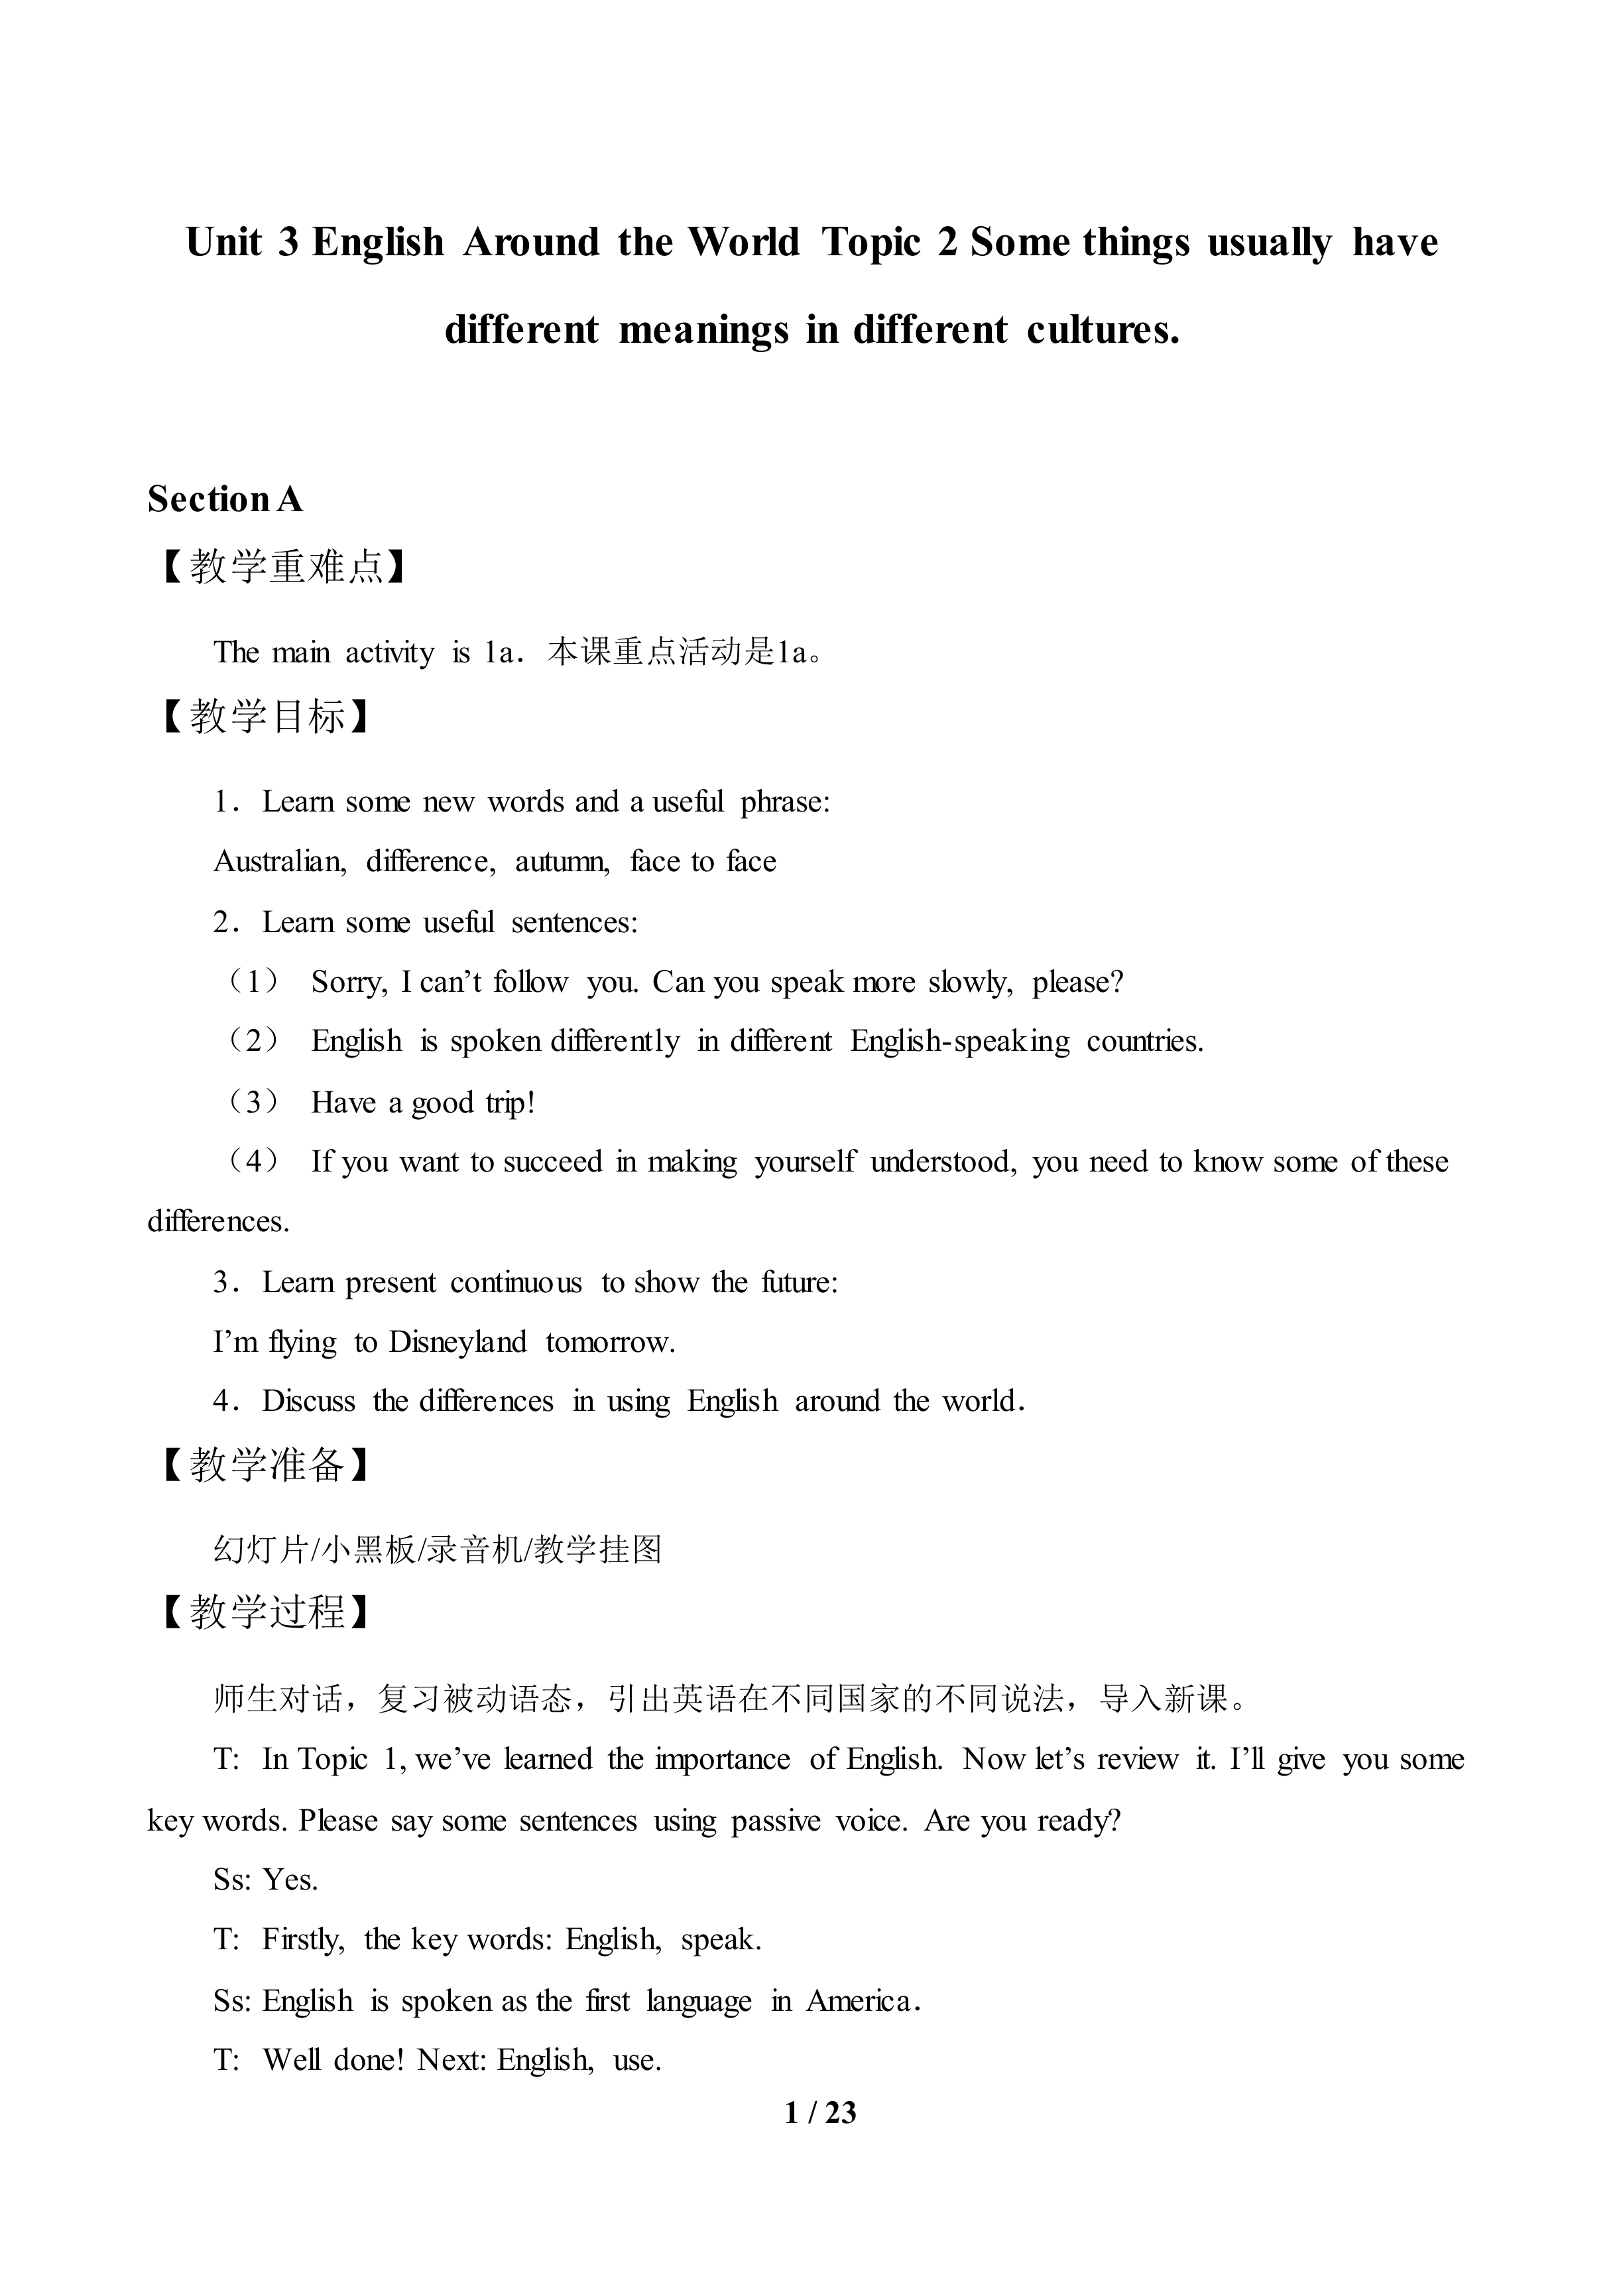 Topic 2. Some things usually have different meanings in different cultures._教案1